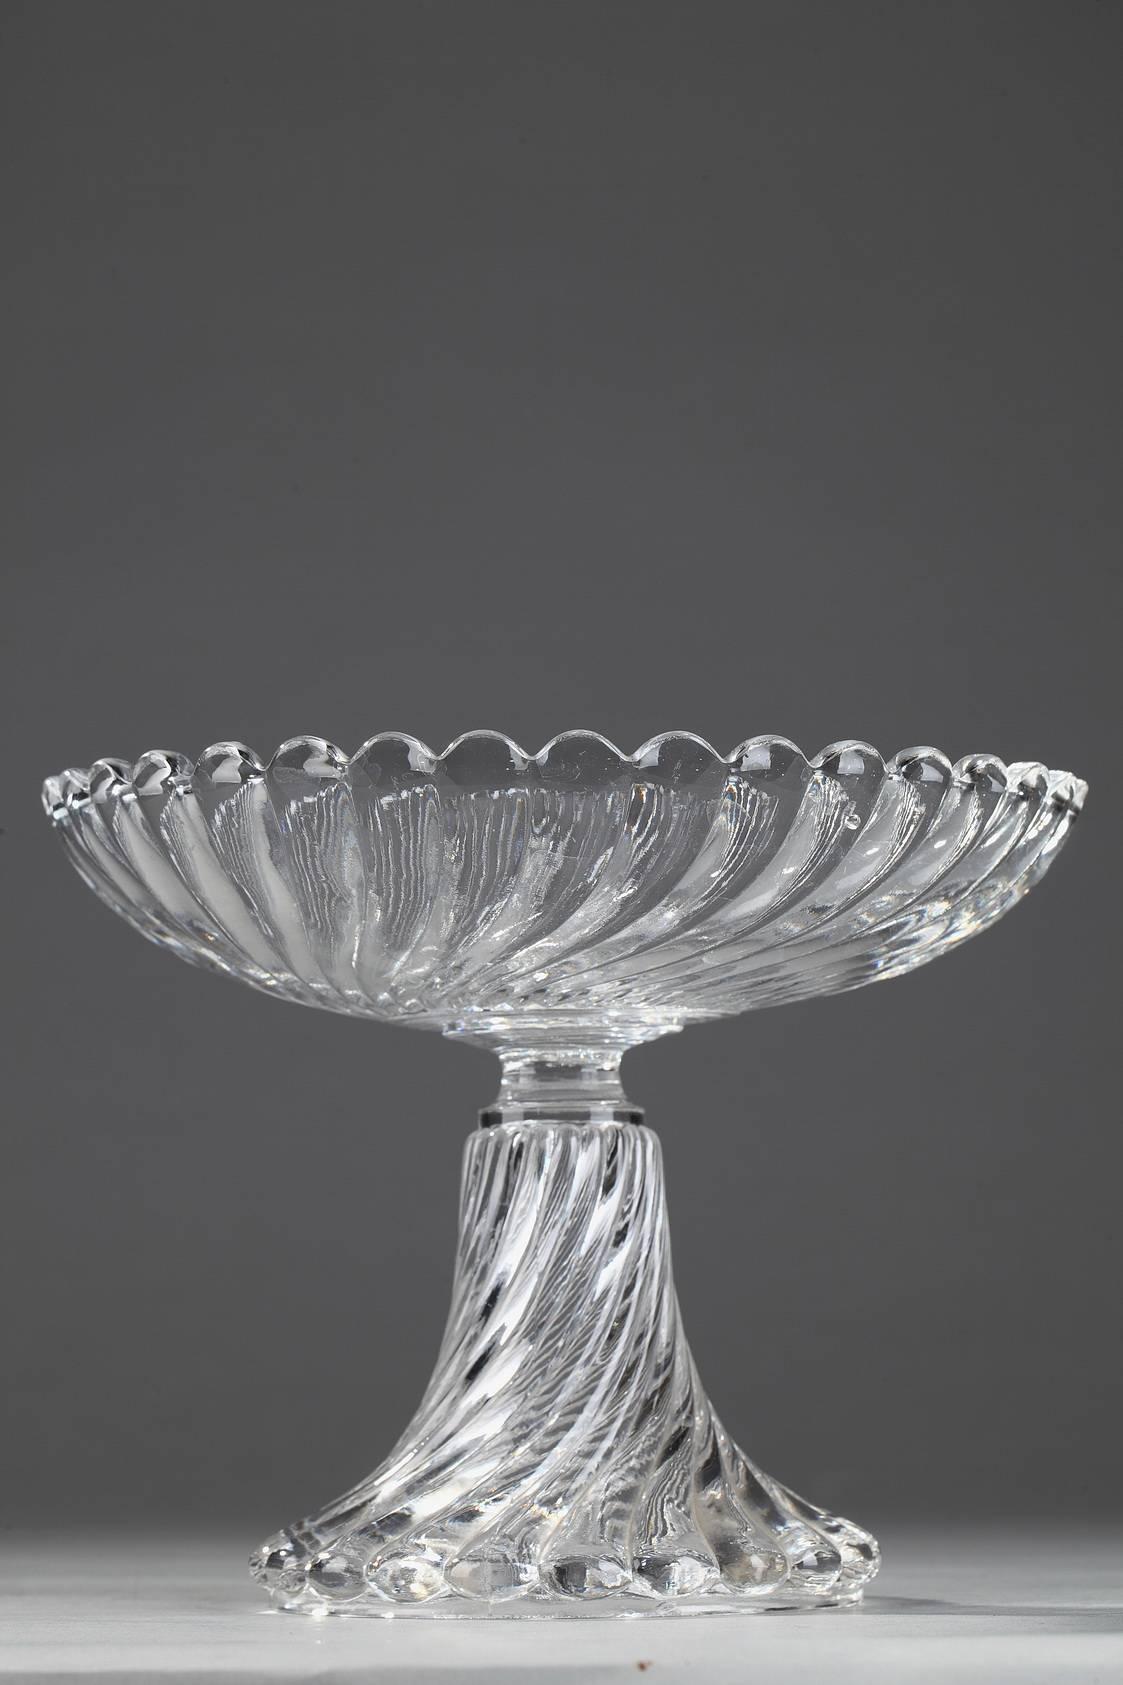 Early 20th century Baccarat cut crystal cup decorated with fluid, spiraling grooves. Signed: Baccarat,

circa 1950
Dimension: W 7.9 in, D 7.9 in, H 6.1 in.
Dimension: L 20 cm, P 20 cm, H 15.5 cm.